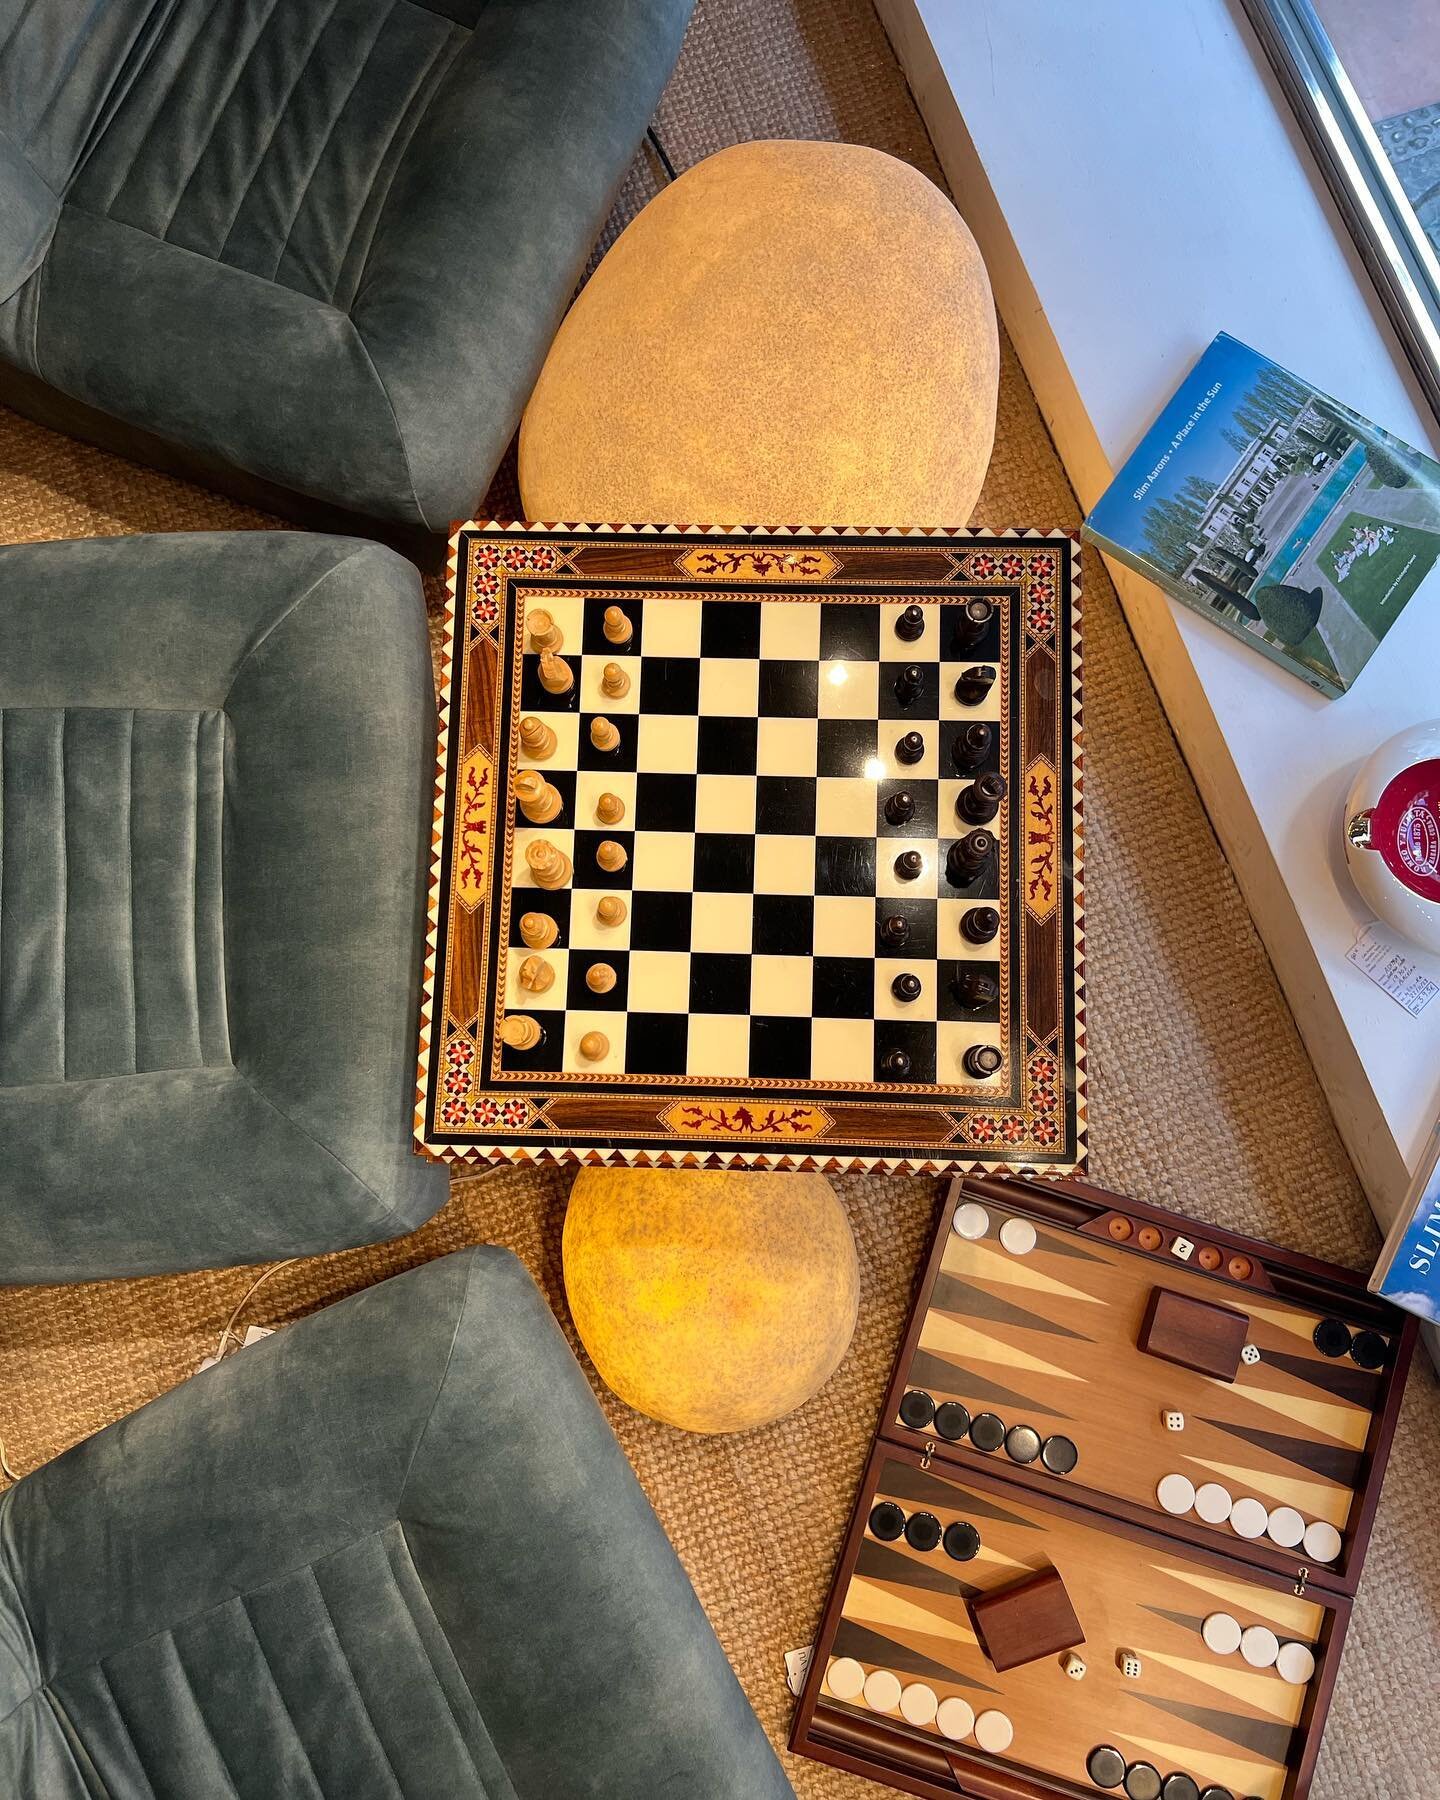 Playtime ! 🎲♟️💆🏻&zwj;♀️ 

-Immaculate chess table from 1970
-Vintage wooden Backgammon set 
-Chairs (recently recovered) Made in Spain from 1970
-Stone Lamps from 1980 
 
Enjoy! 💖

#vintage #vintagemarbelladejavu #uniquearticles #vintageluxuryfas